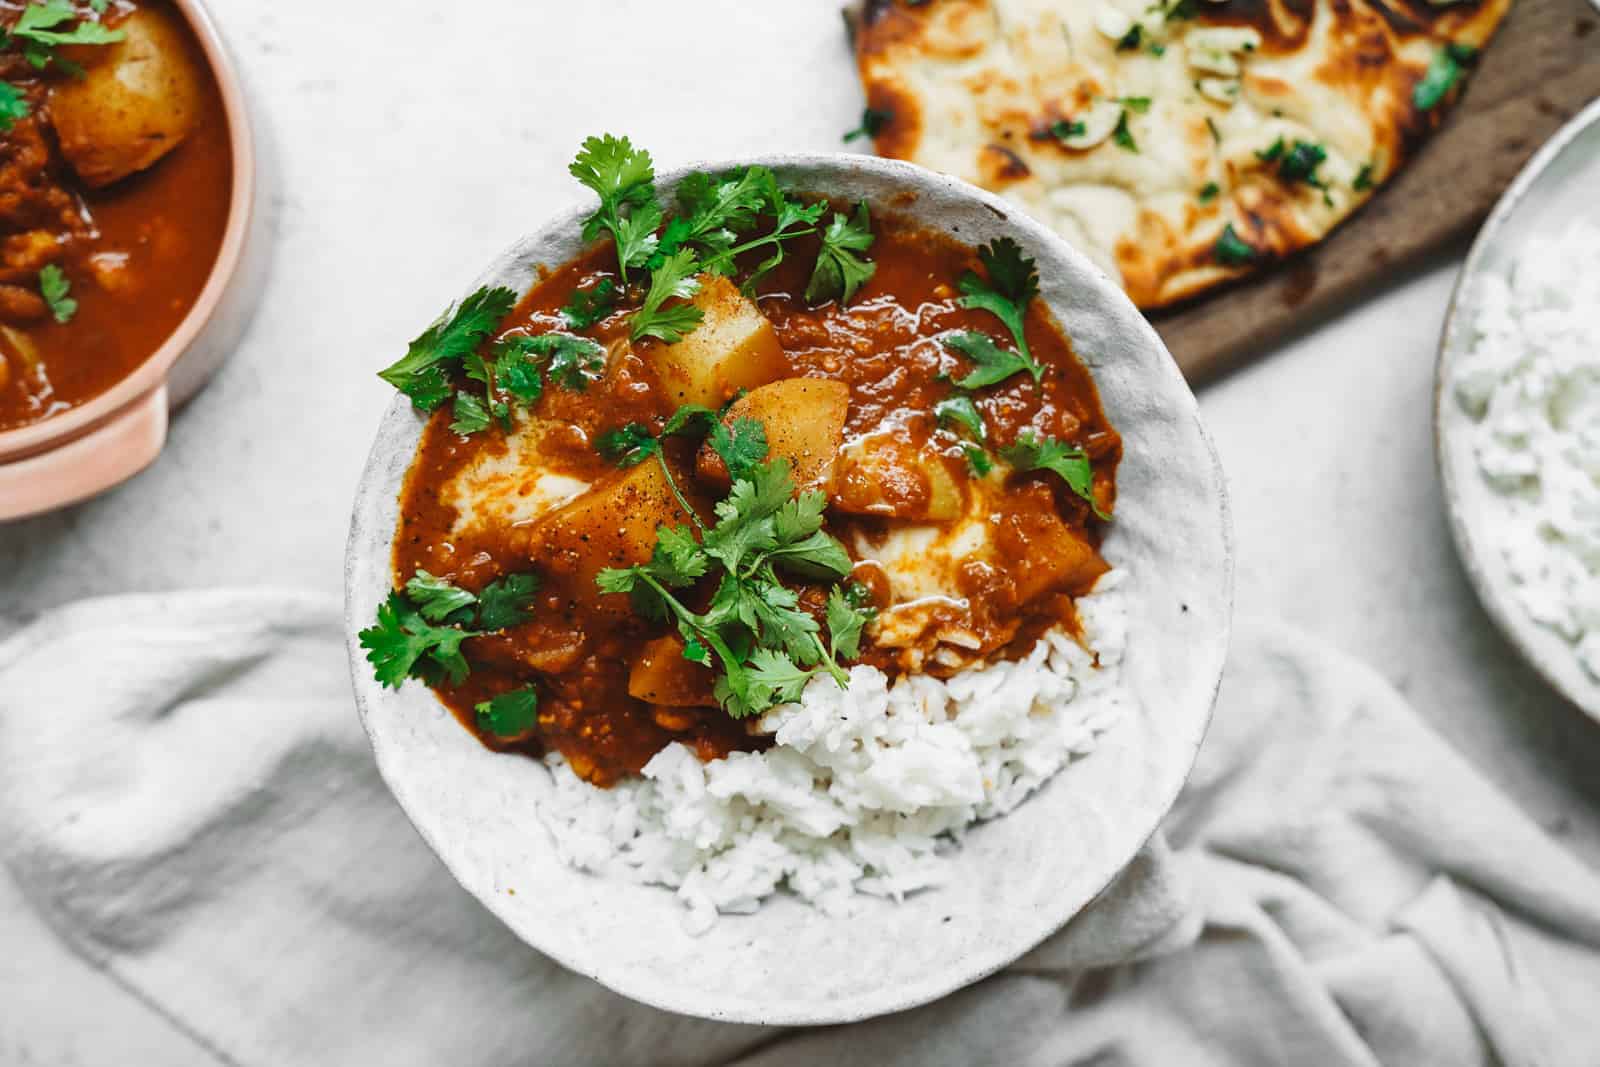 Big bowl of the Vegan Butter Chicken recipe made with chickpeas in a bowl on a table with Naan in the background.